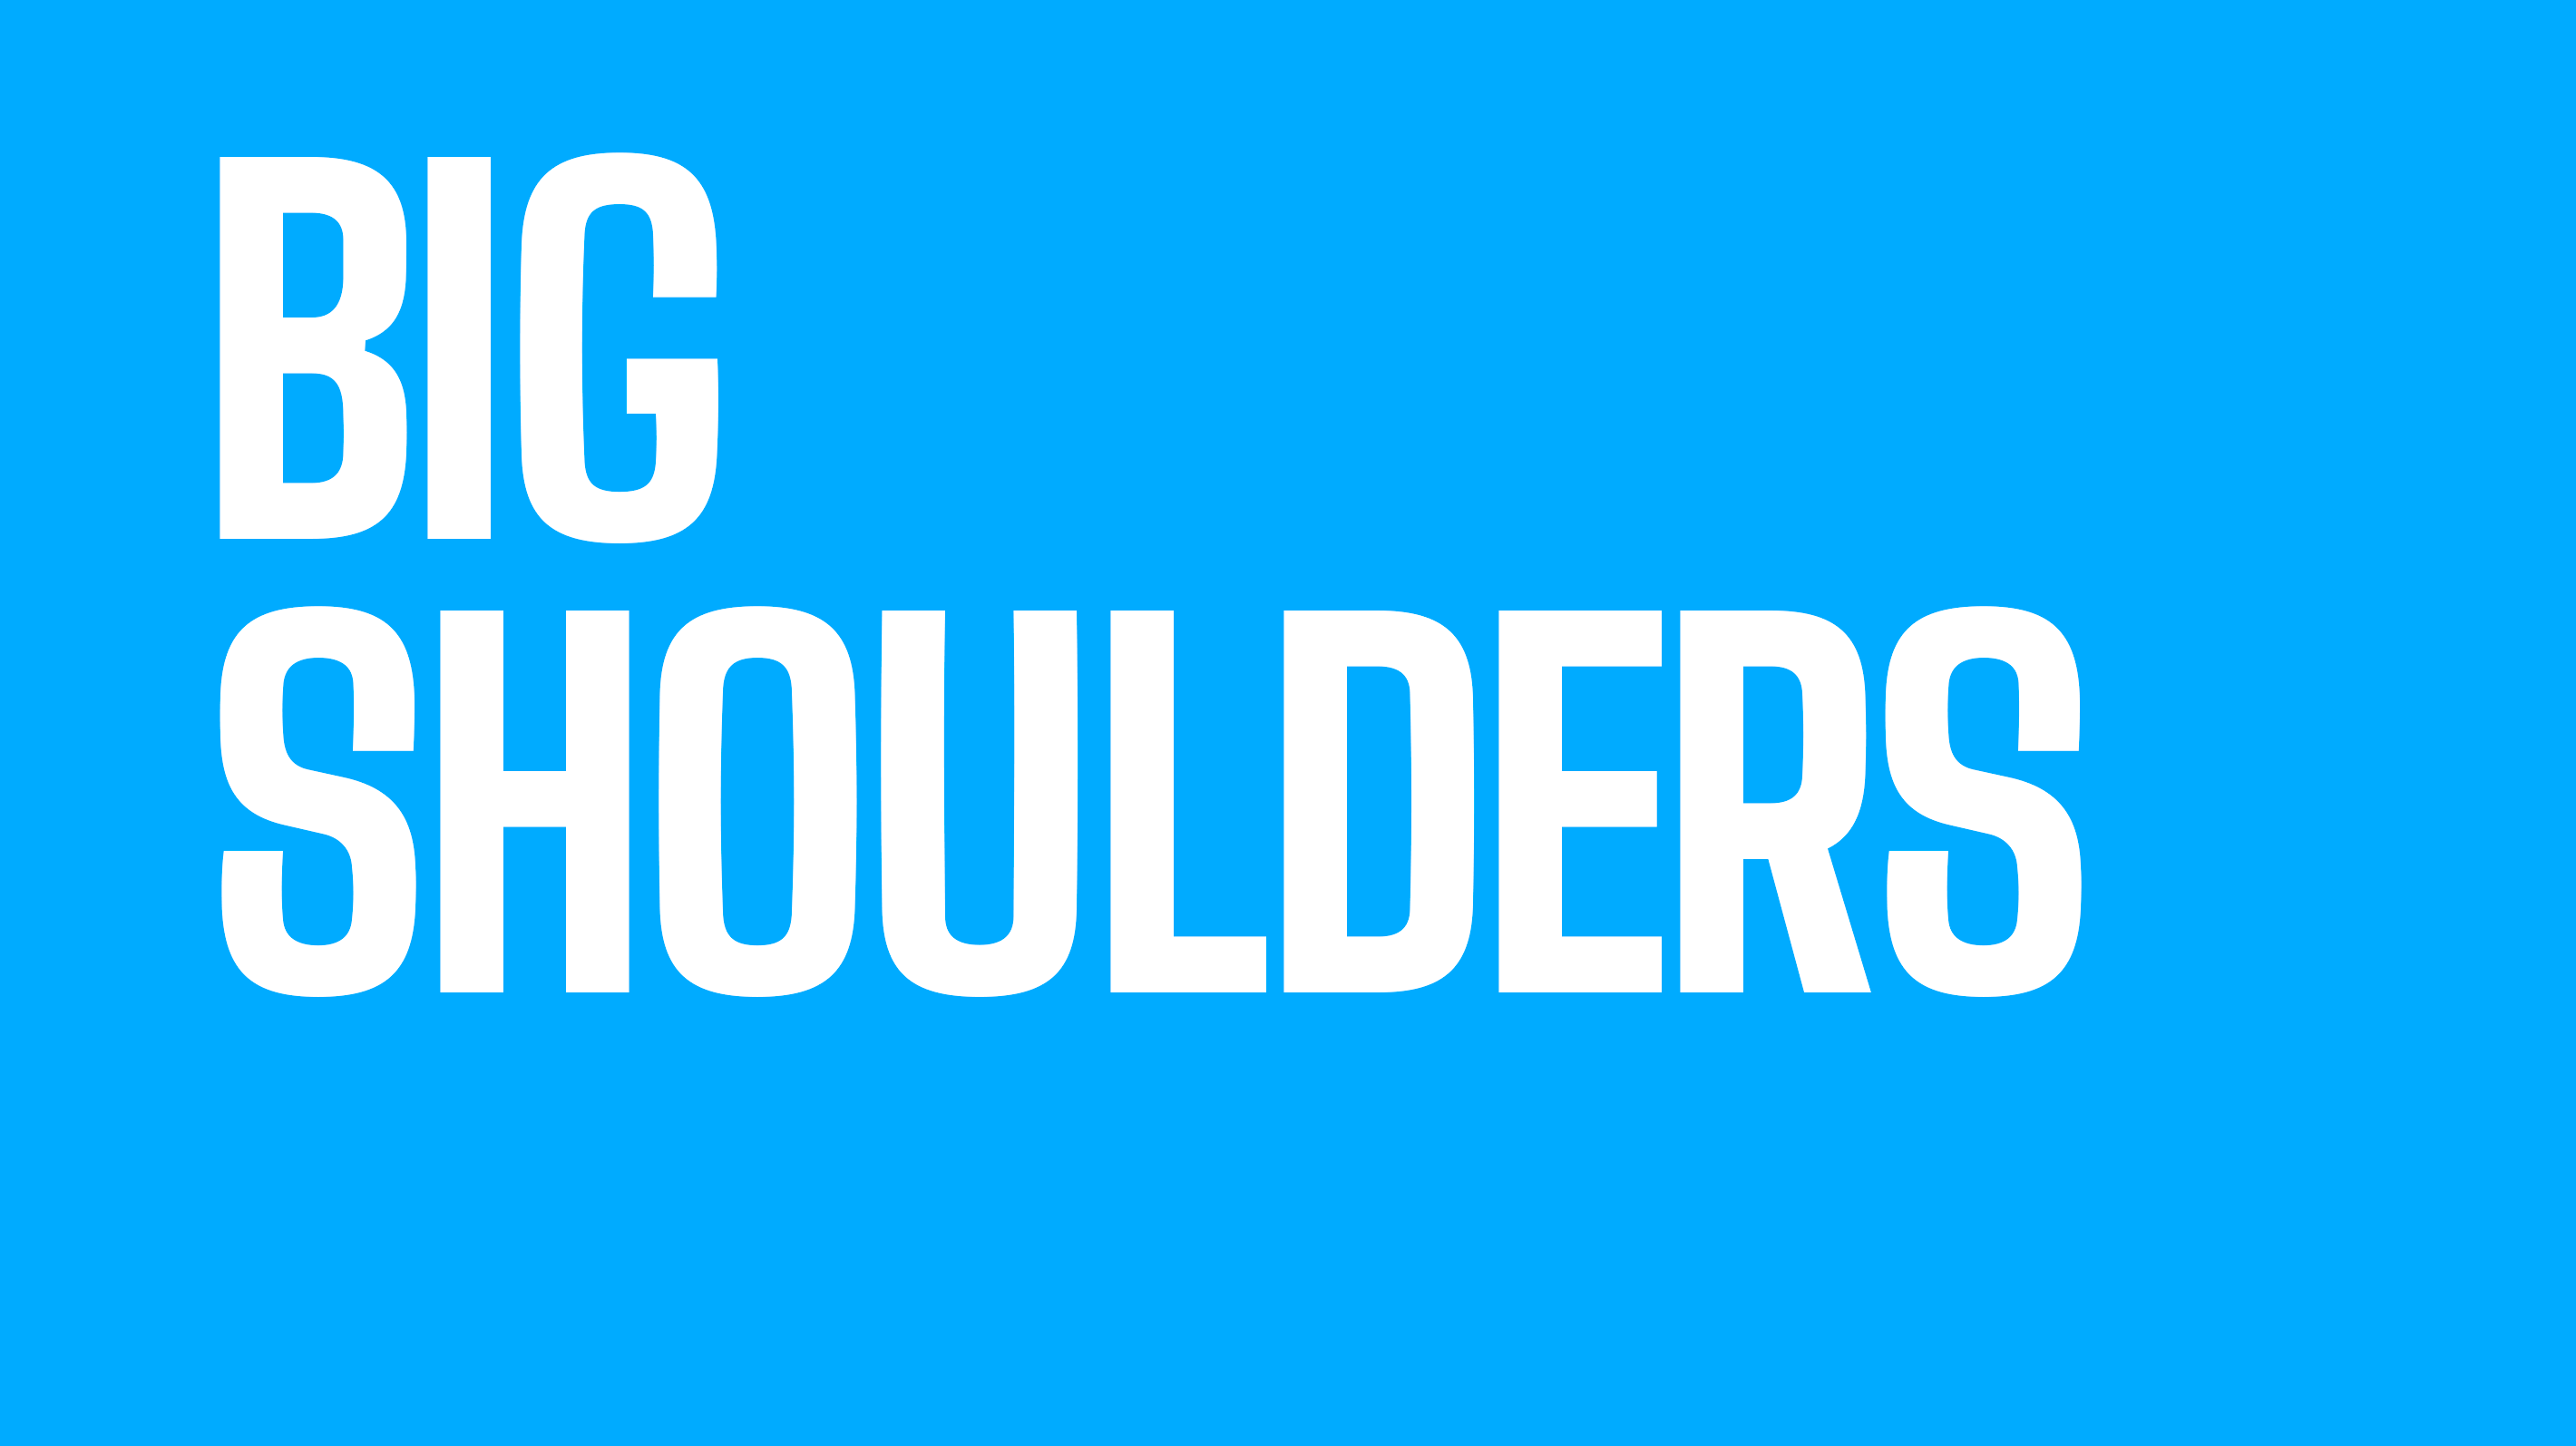 A Picture of Big Shoulders Typeface